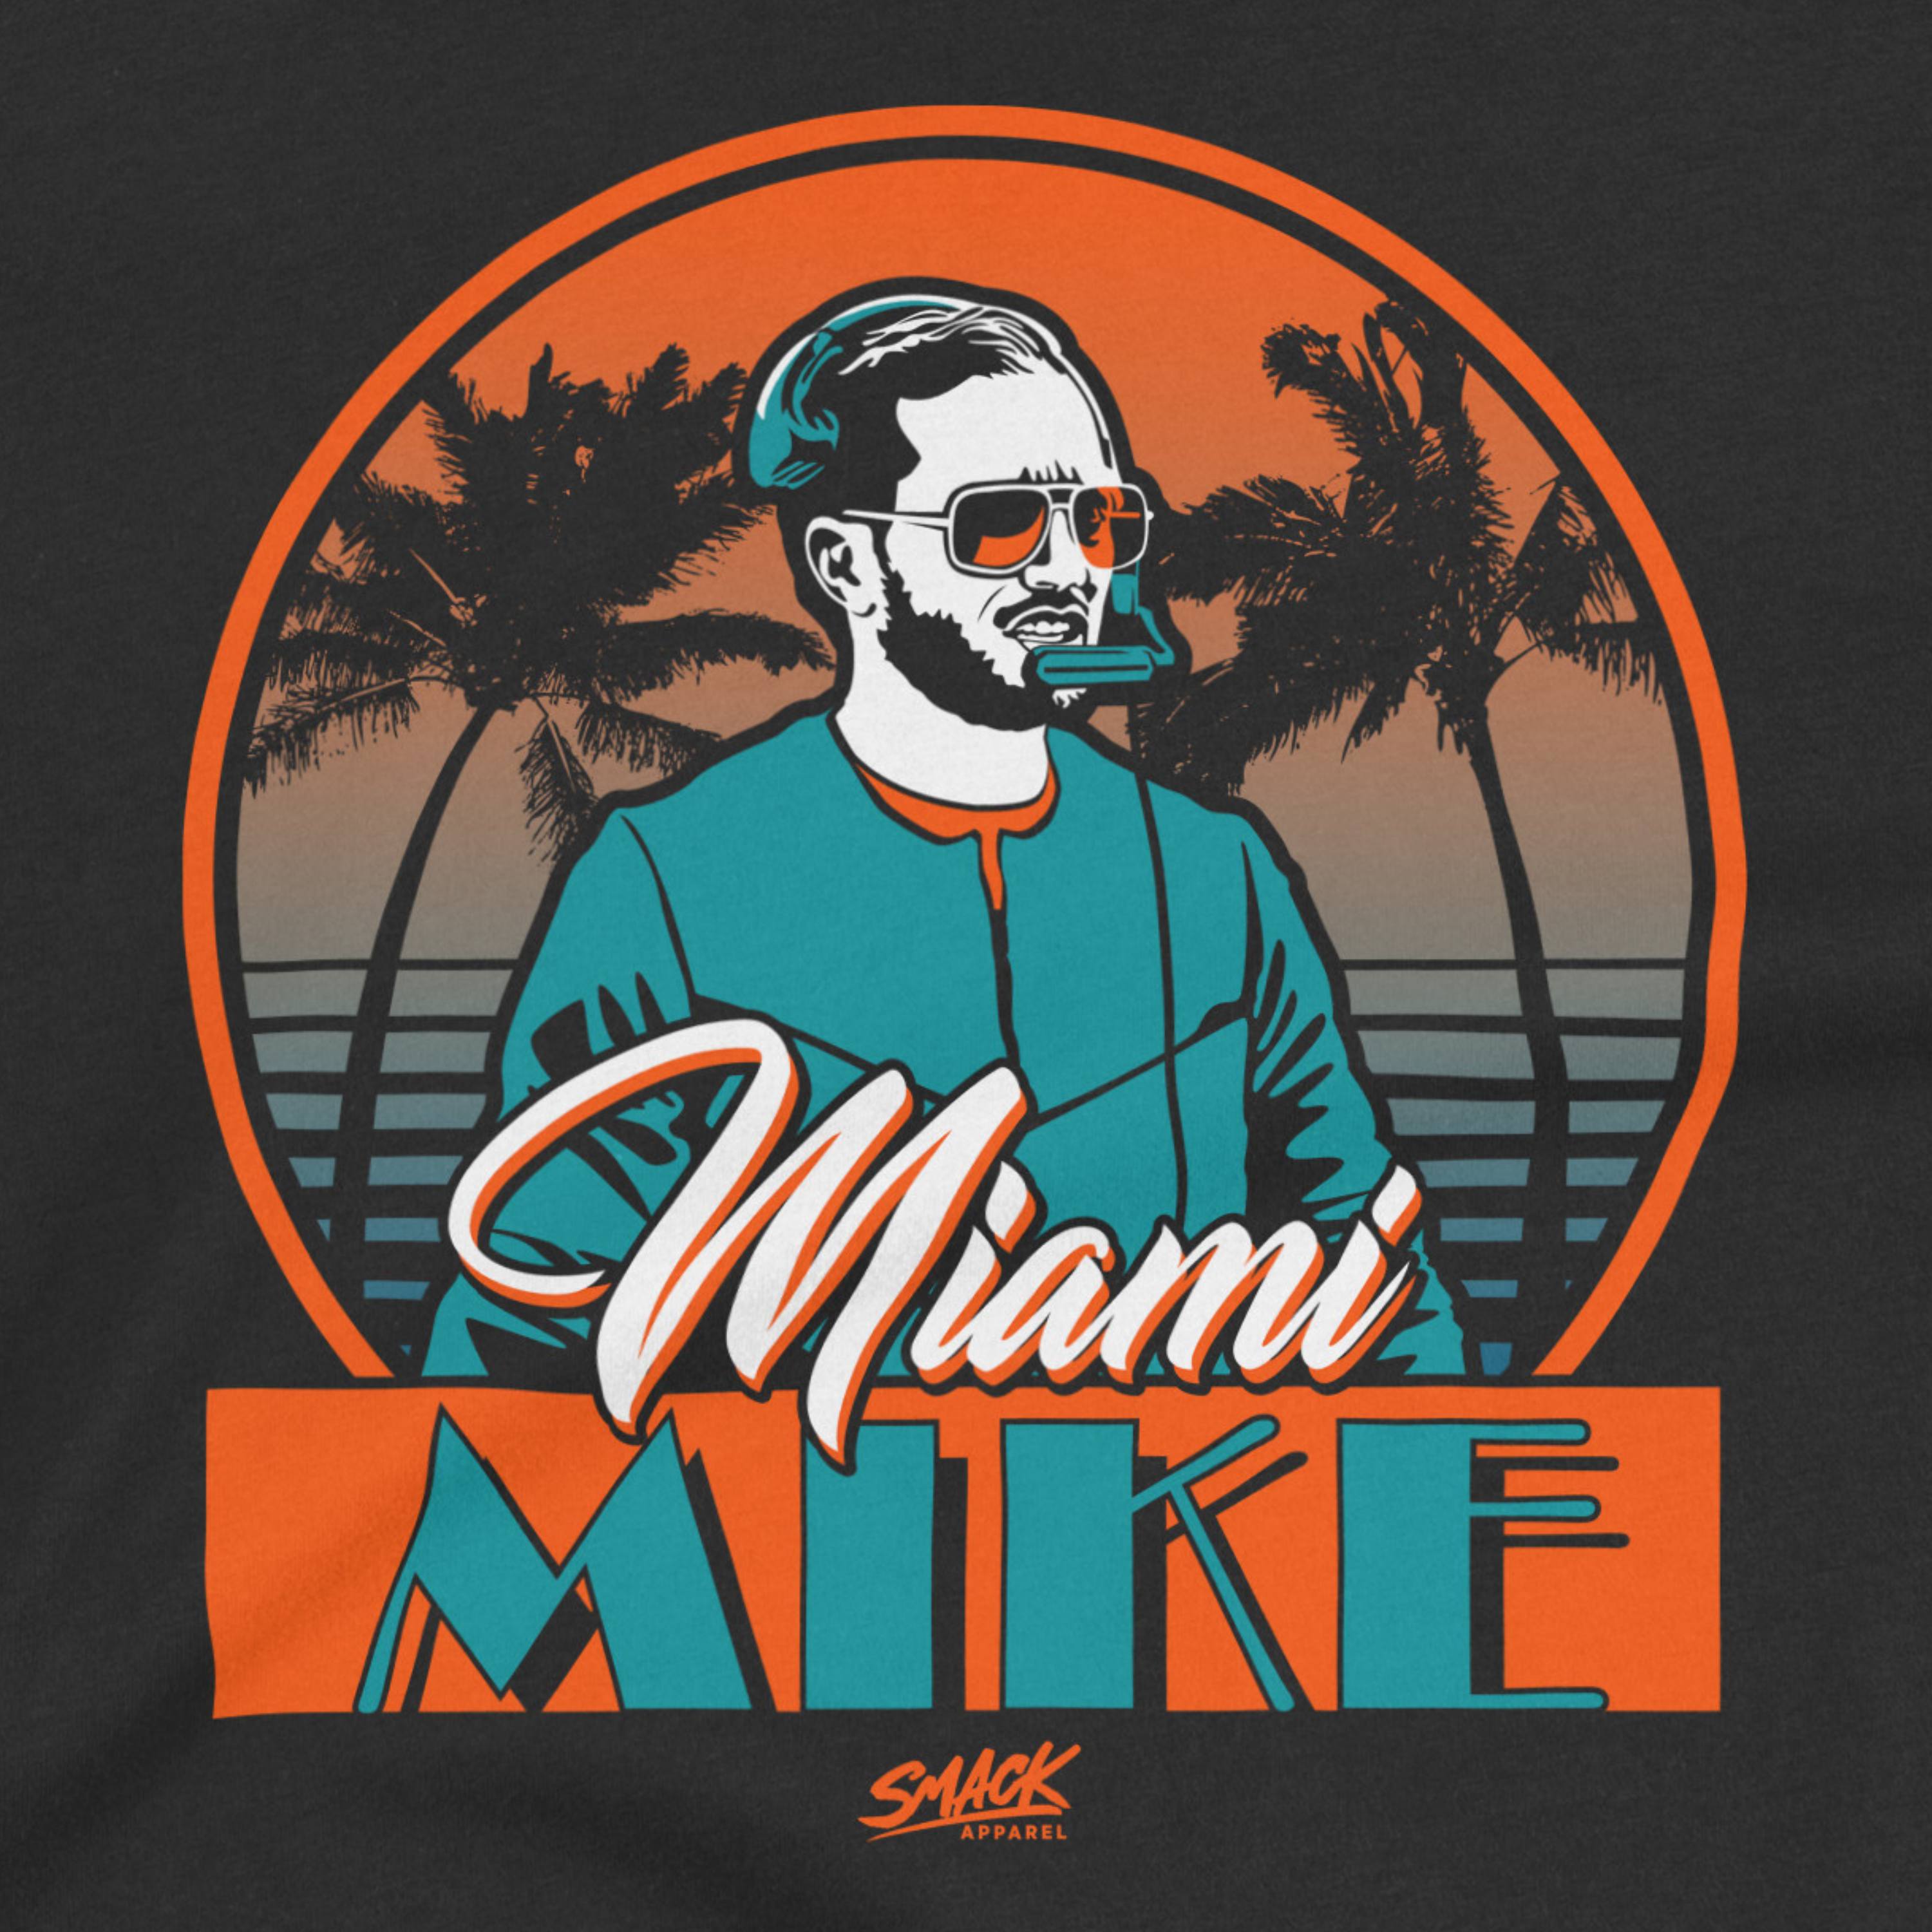 Smack Apparel Miami Mike T-Shirt for Miami Football Fans Soft Style Short Sleeve / Large / Black